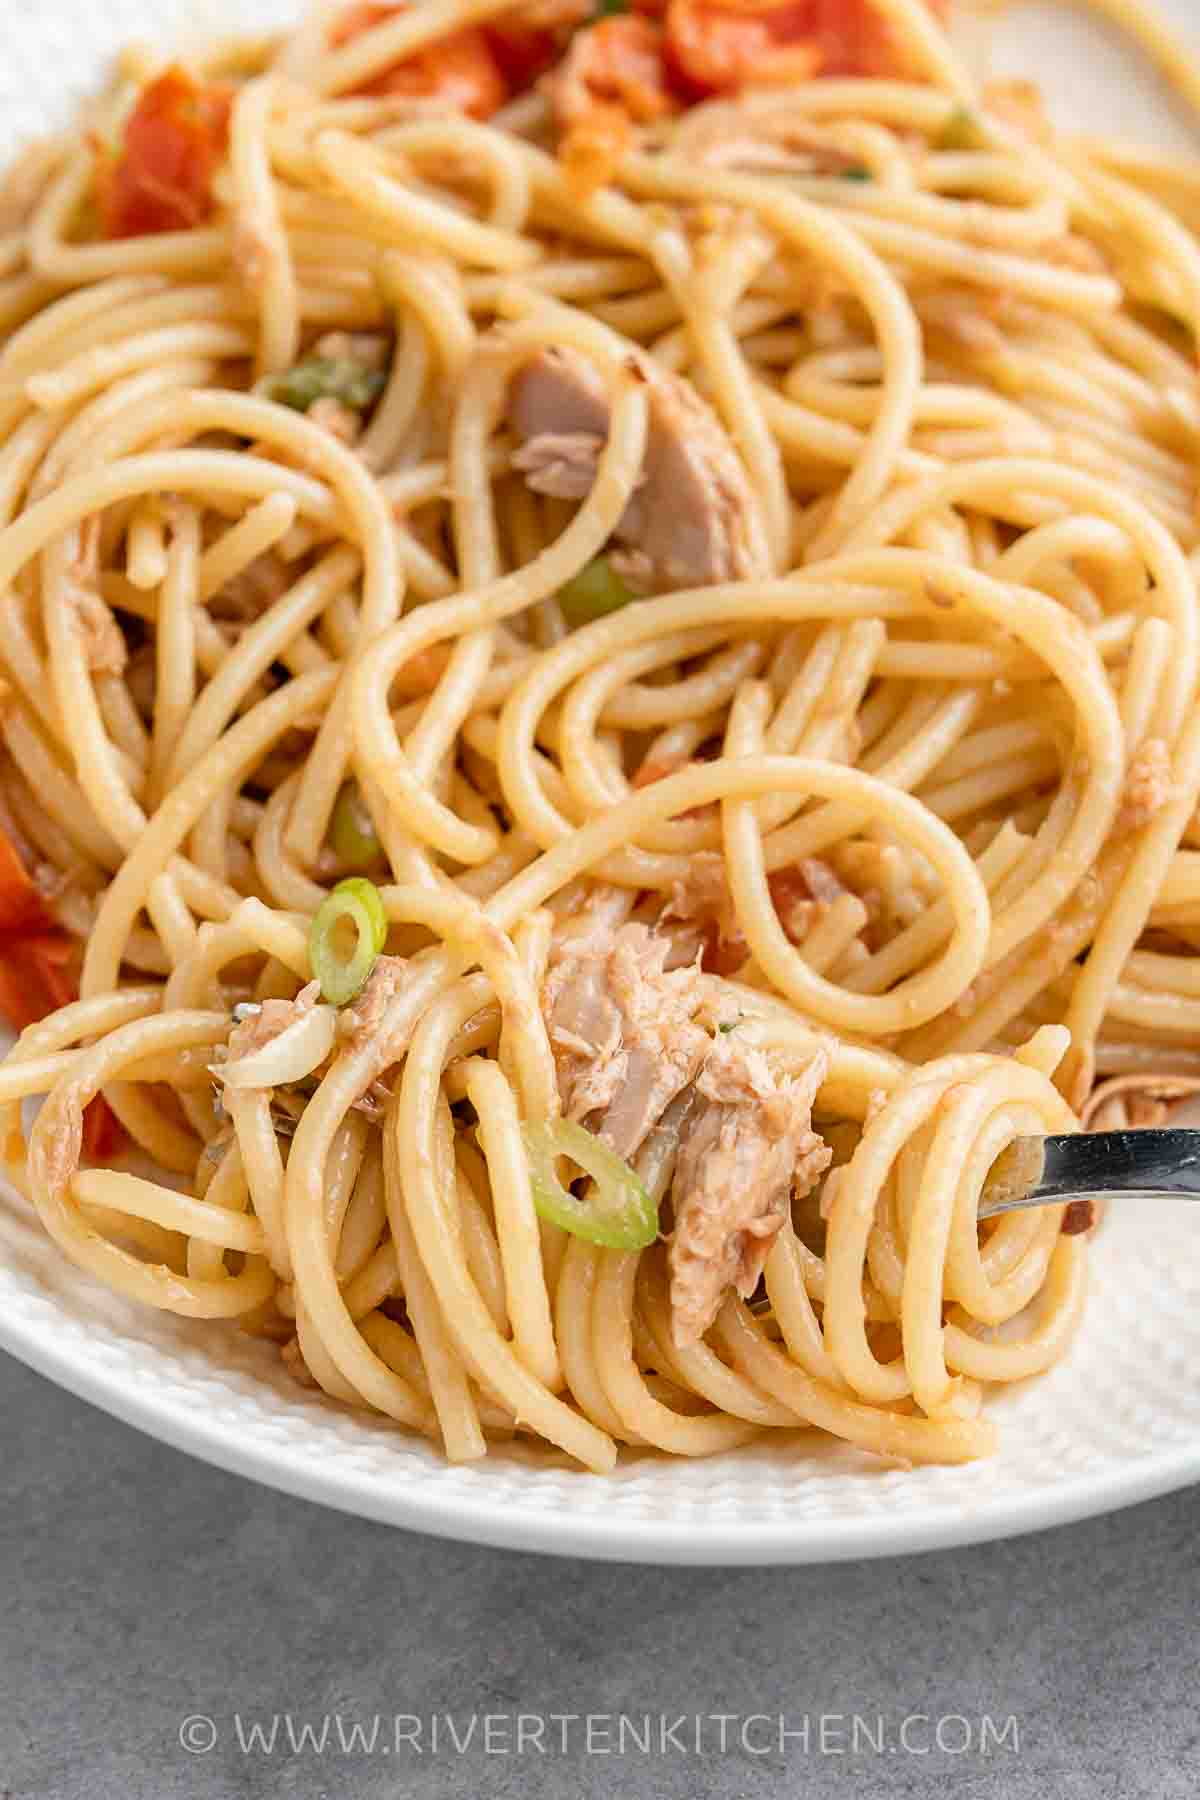 Tuna pasta with olive oil and tomatoes